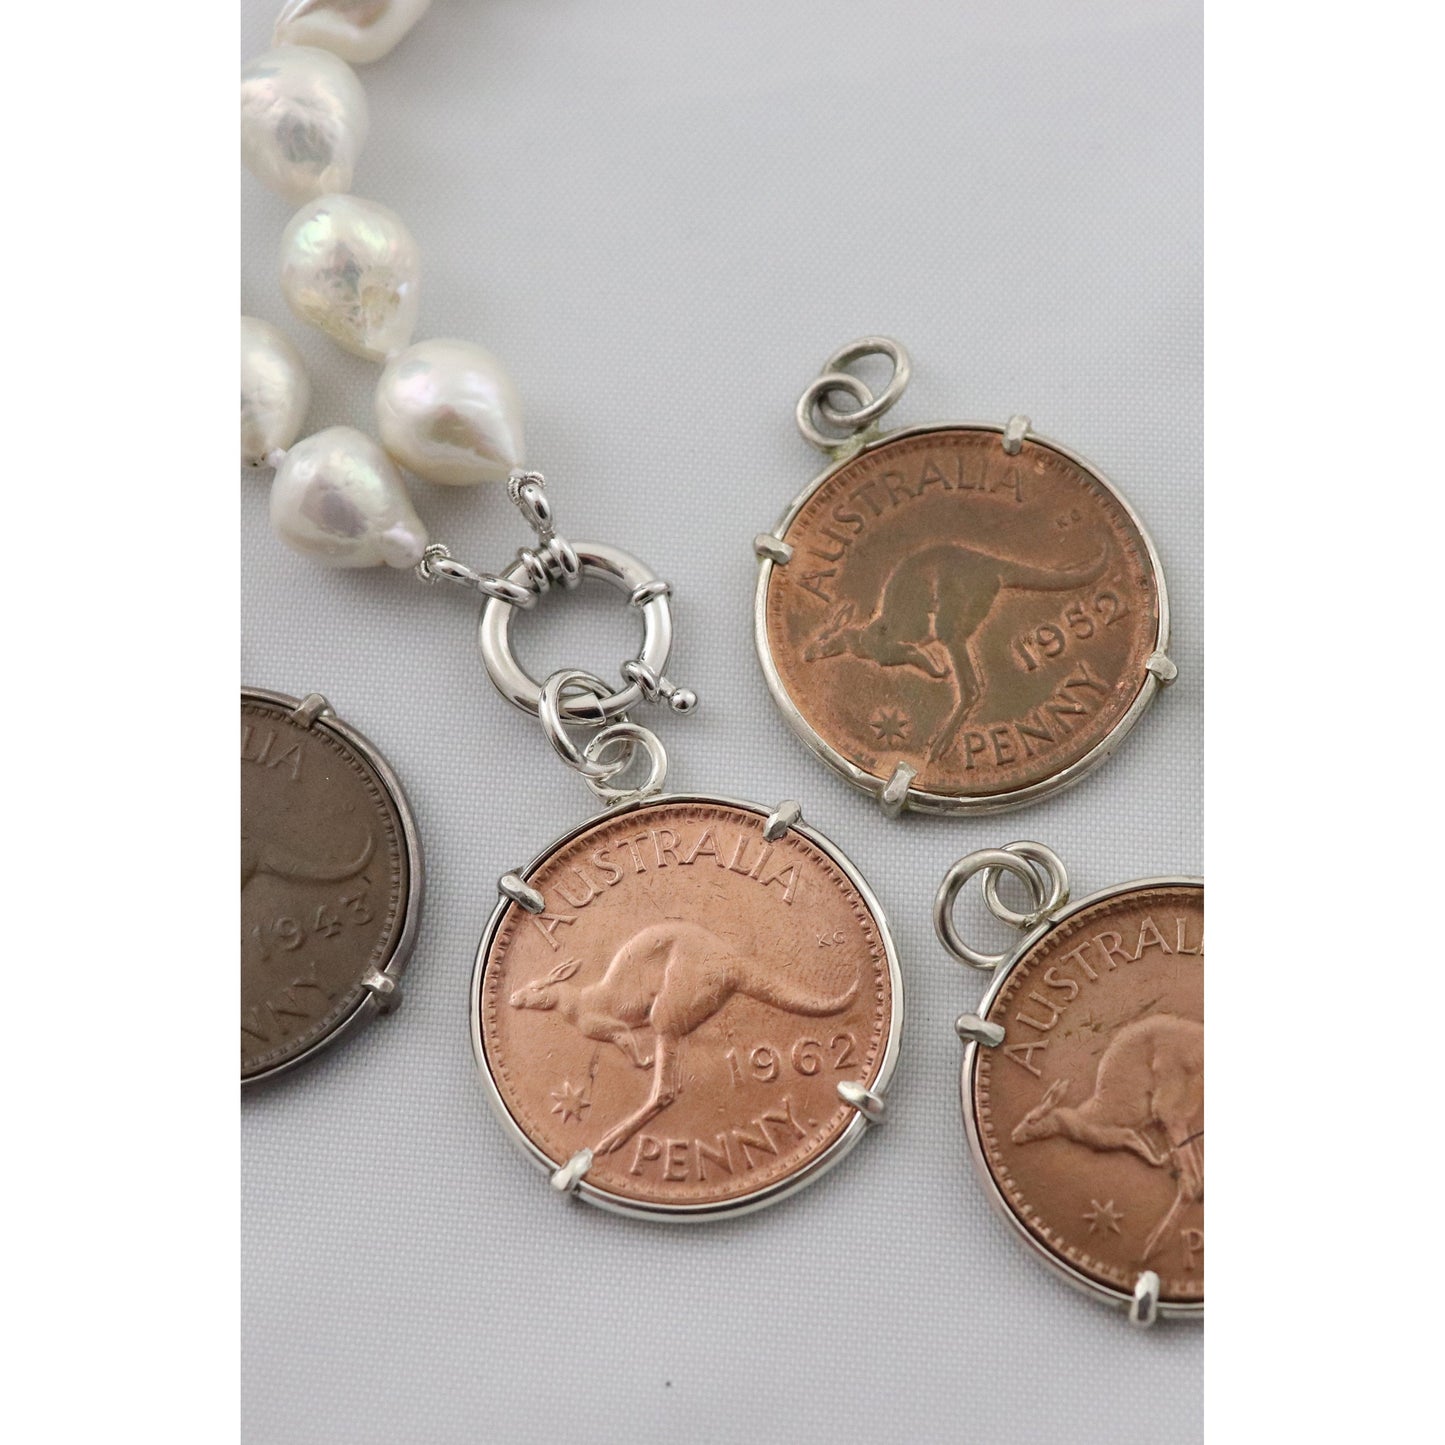 Vintage Australian penny coin necklace.